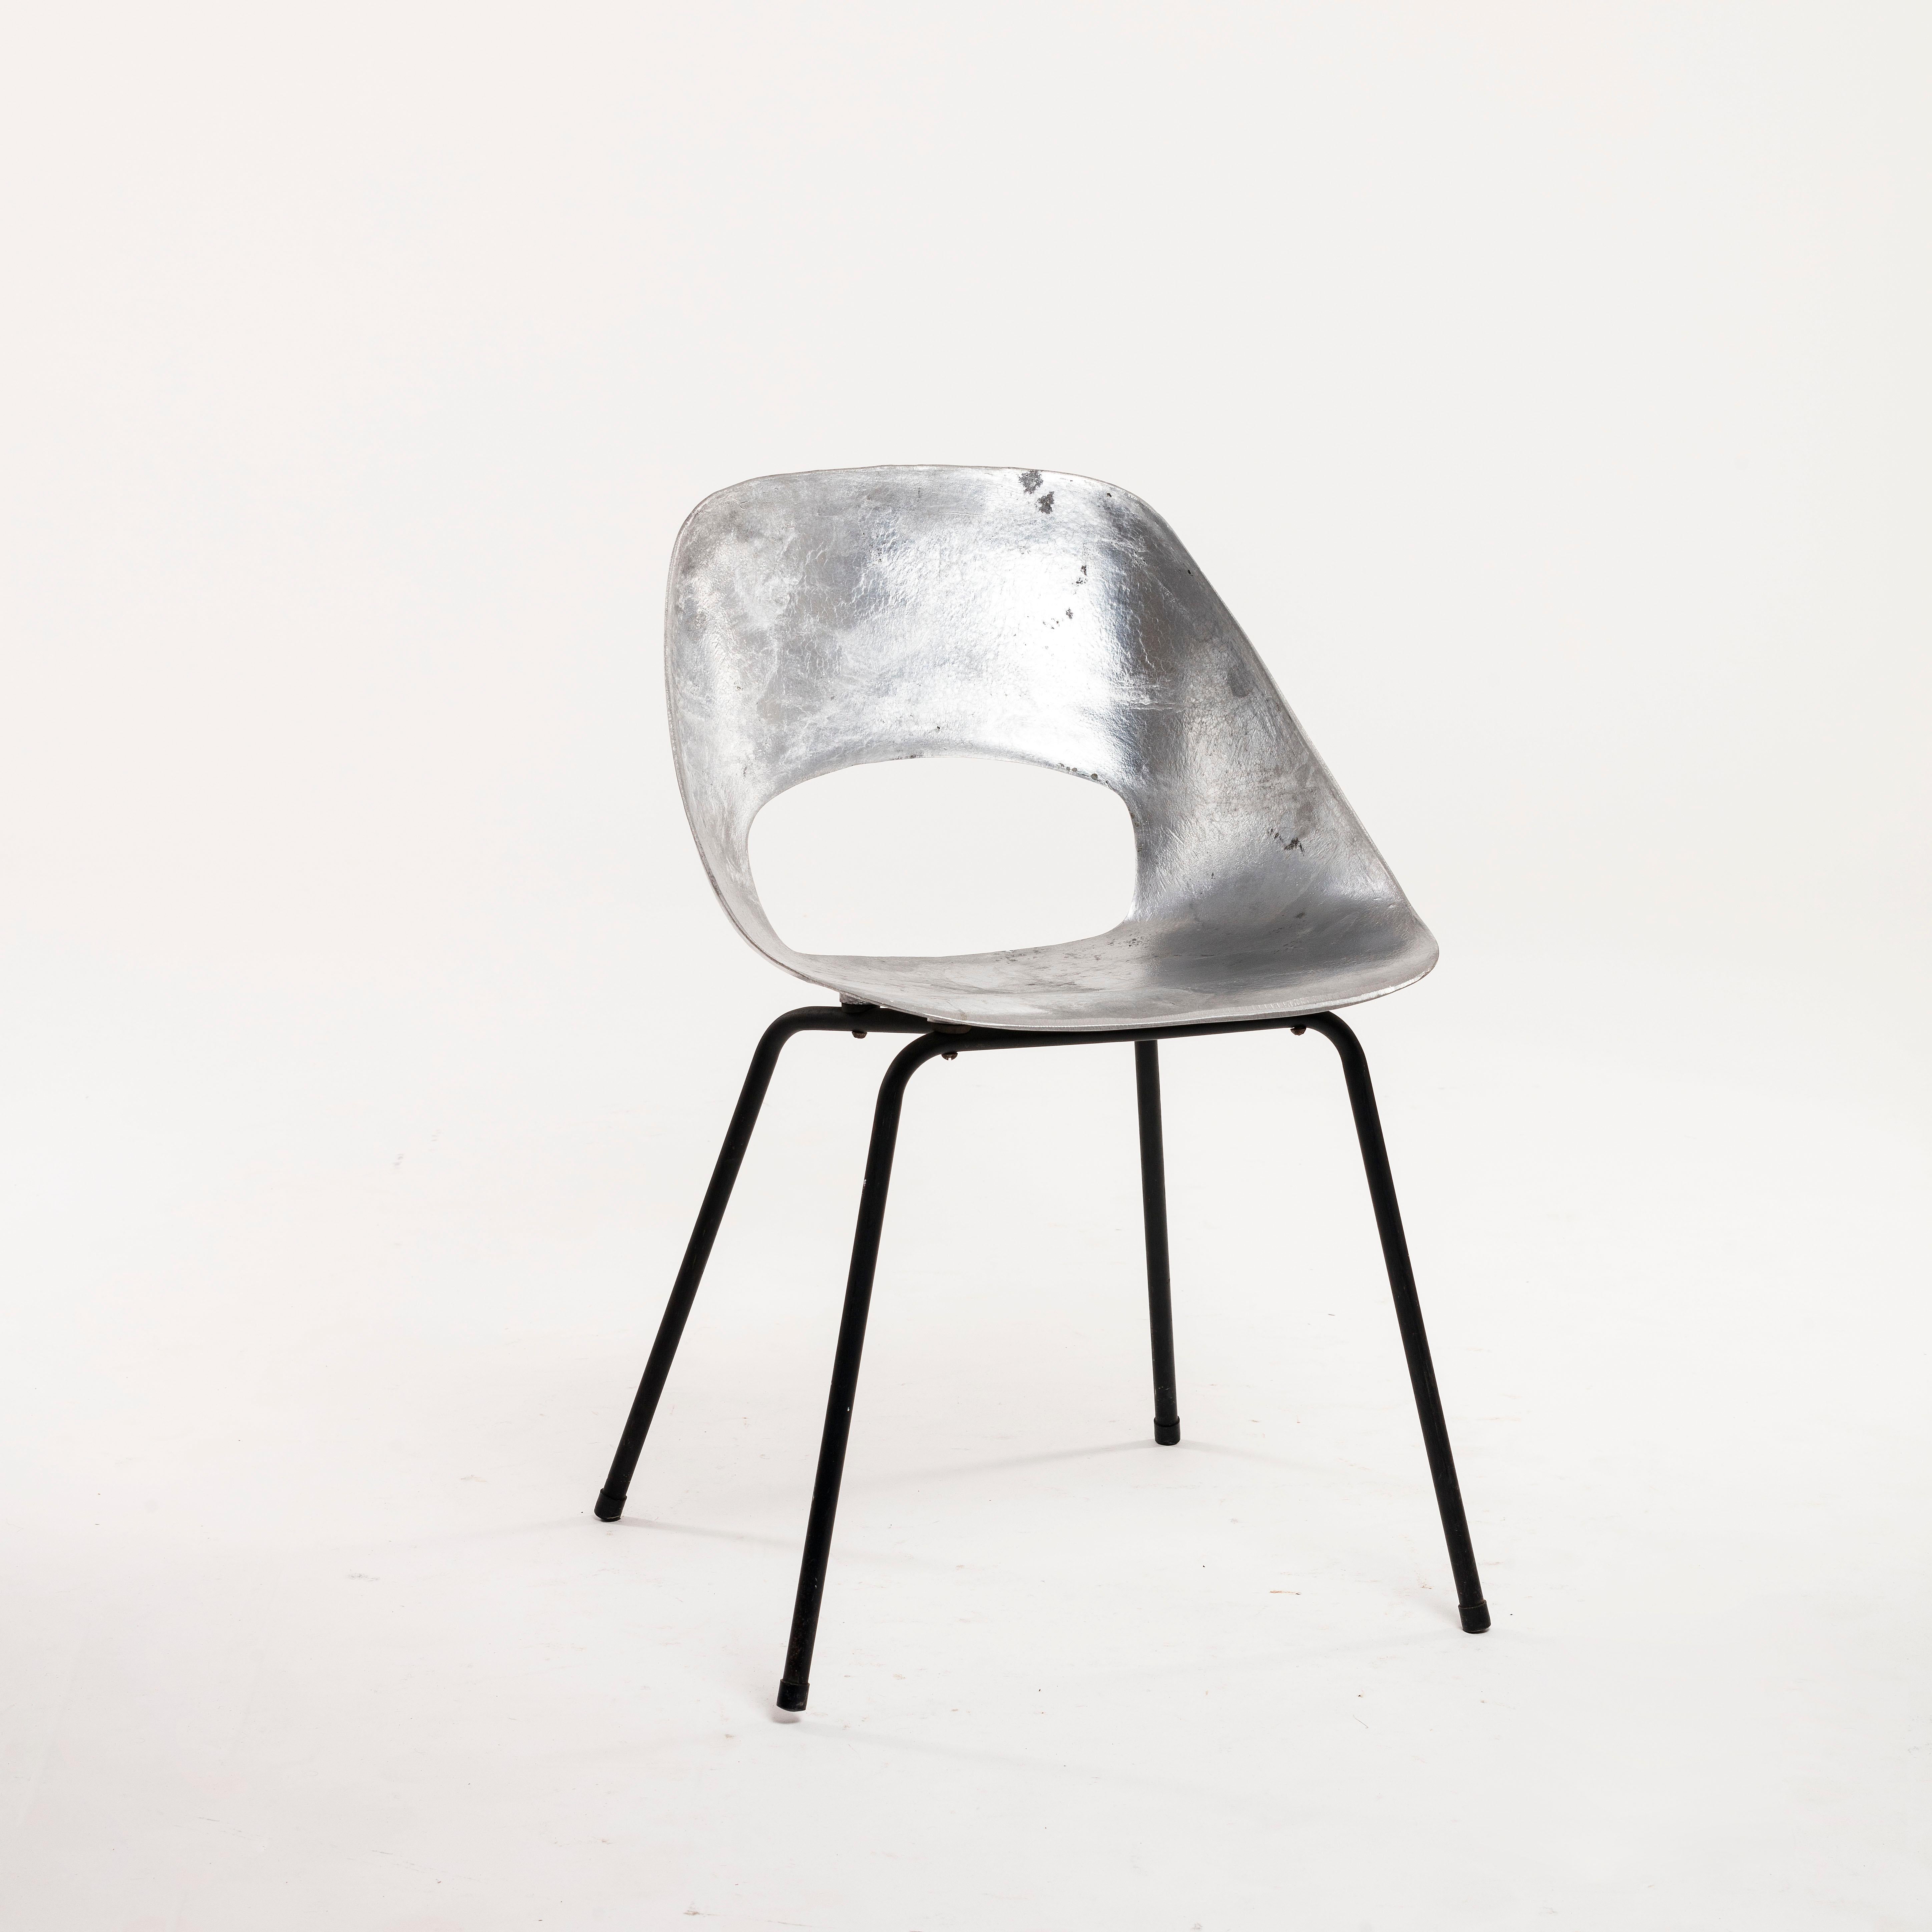 Stunning cast aluminum chairs by Pierre Guariche. Sculpted and curved aluminum seat with cut-out sits on sleek four leg black tubular metal base
Great standalone piece.

also available 1 chair with their original orange fabric on a cast aluminium